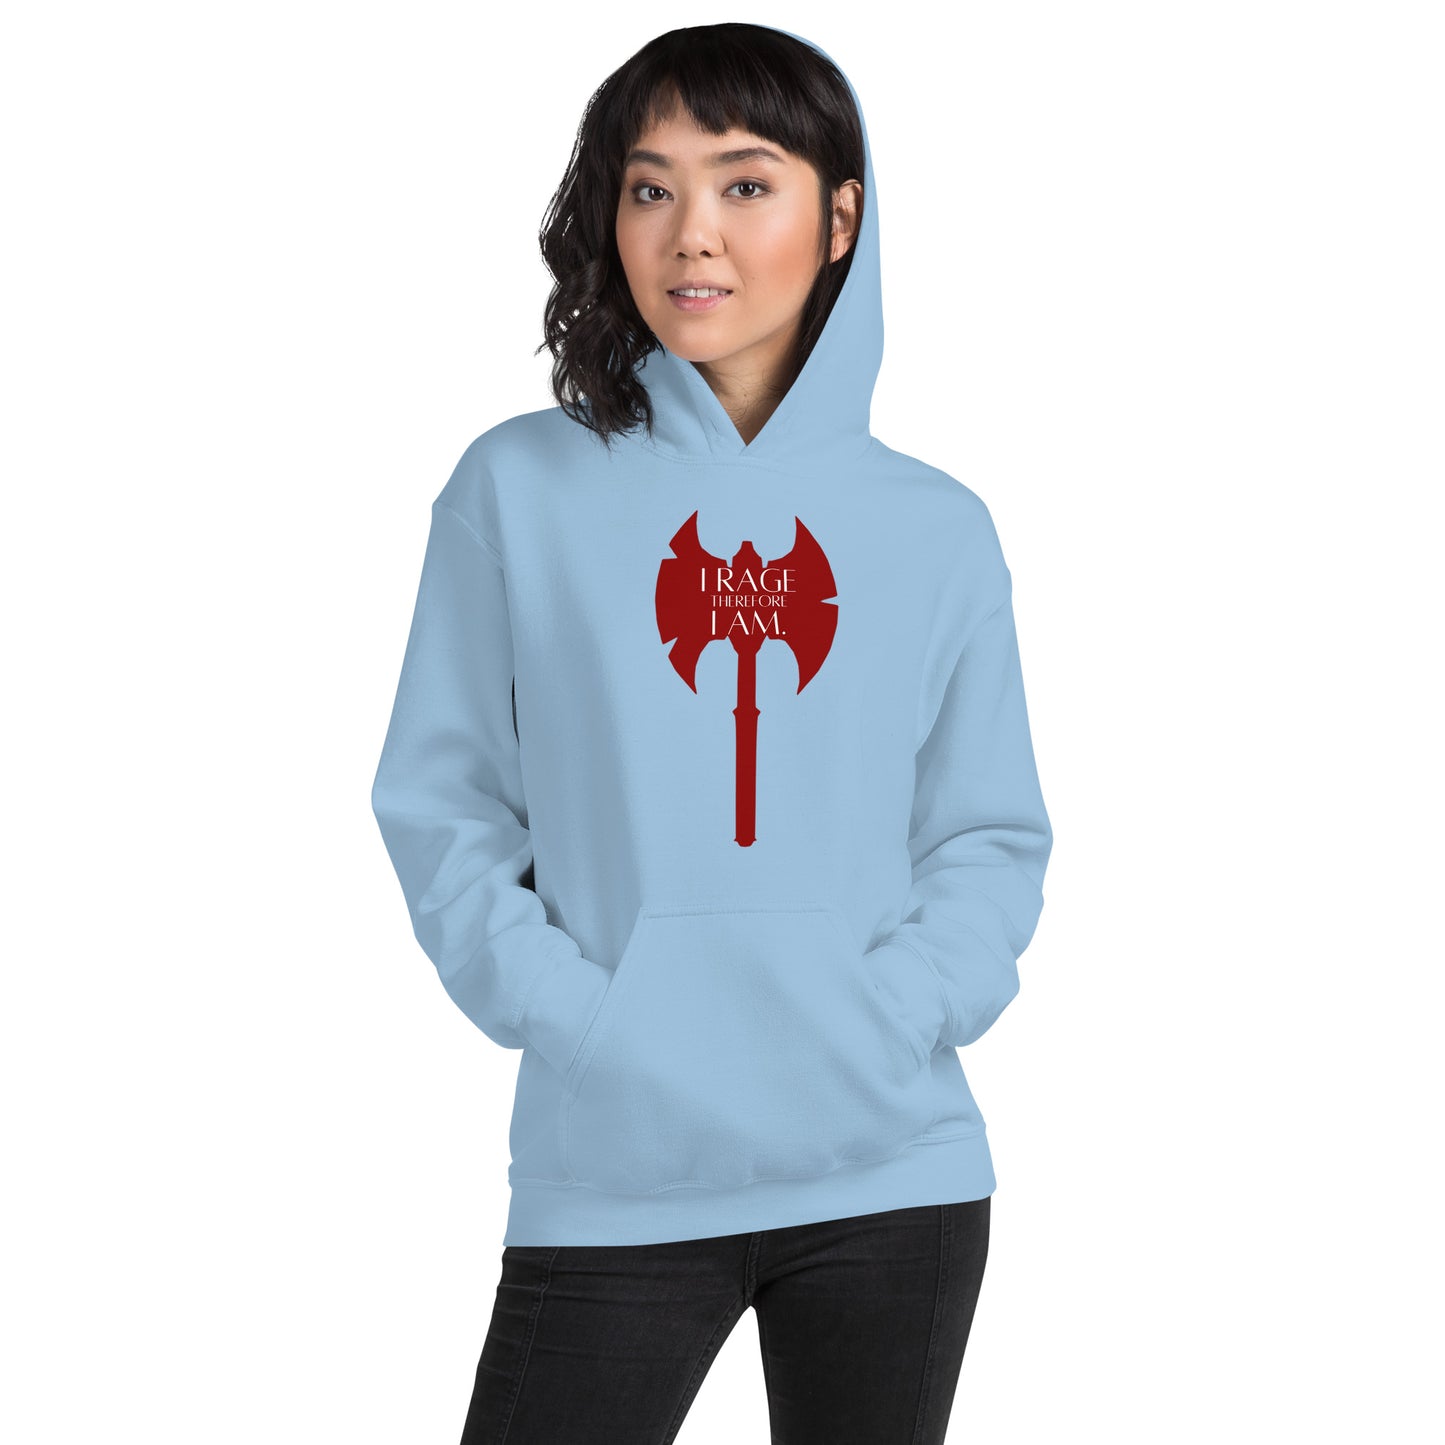 I Rage therefore I am - Barbarian Unisex Hoodie